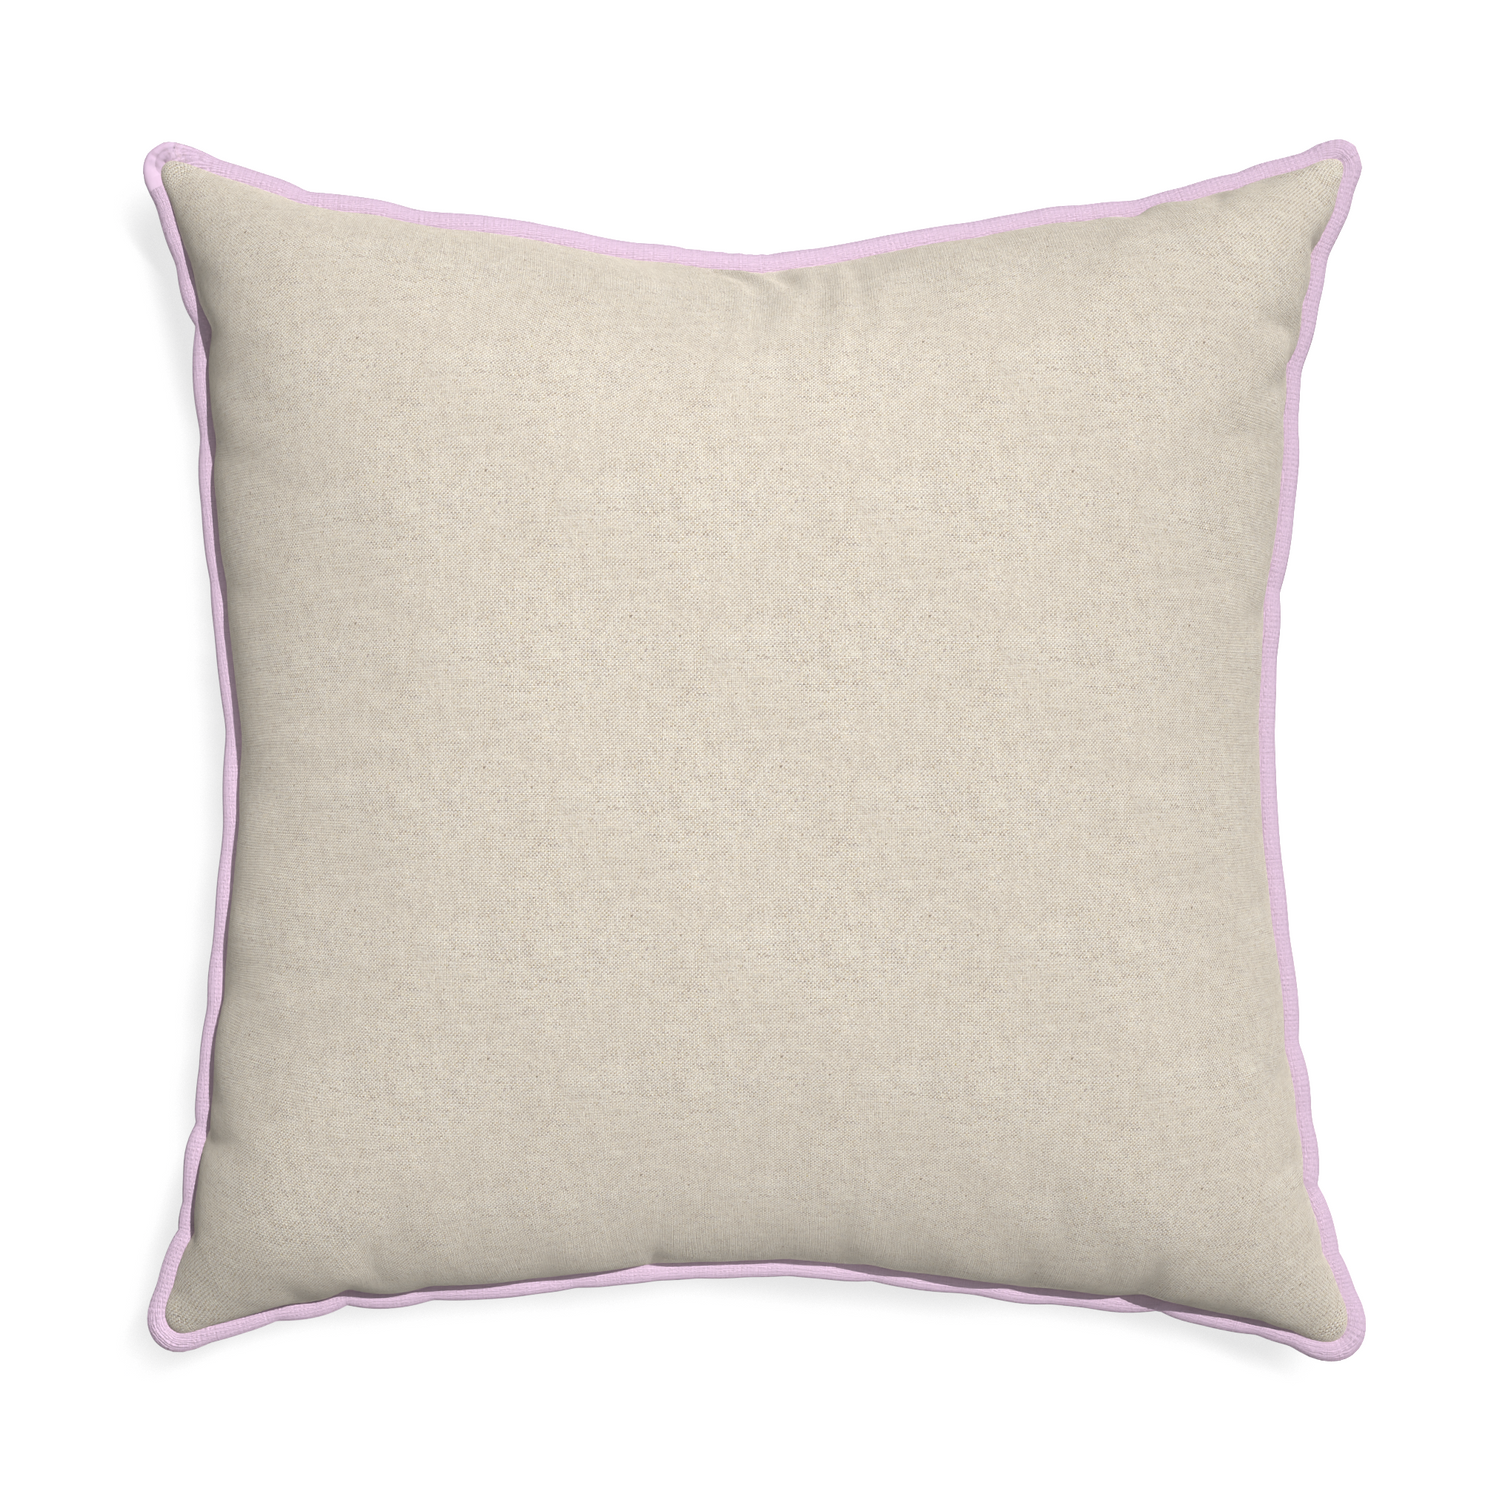 Euro-sham oat custom pillow with l piping on white background